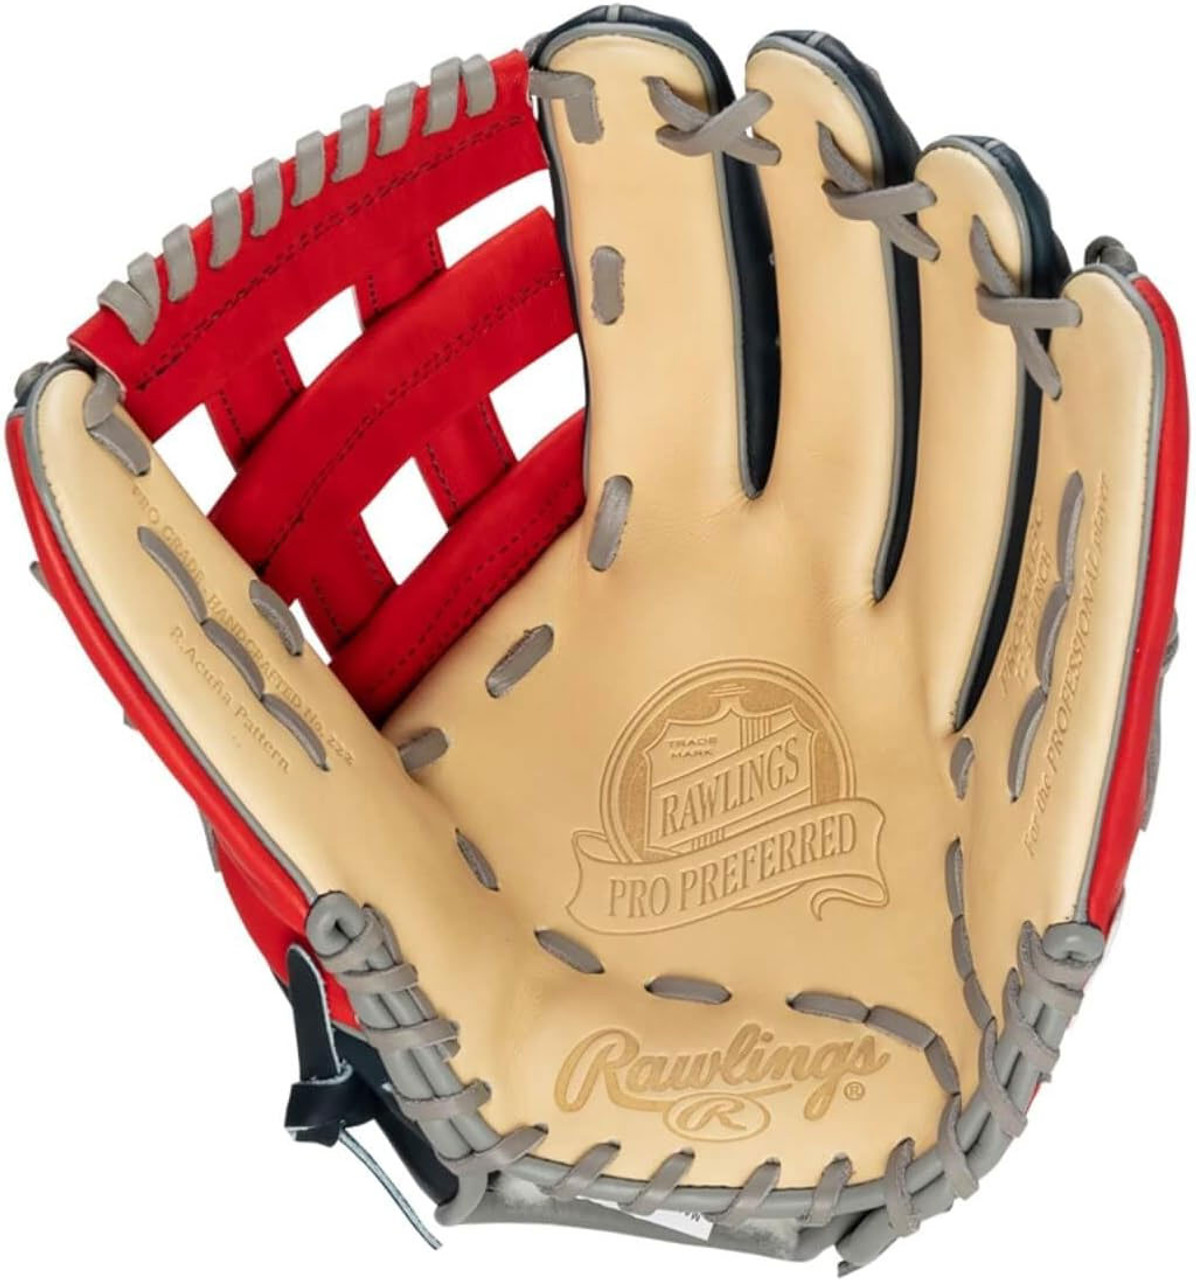 Rawlings Pro Preferred Series 12.75 Ronald Acuna Jr. Baseball Glove -  Right Hand Throw - Sports Unlimited